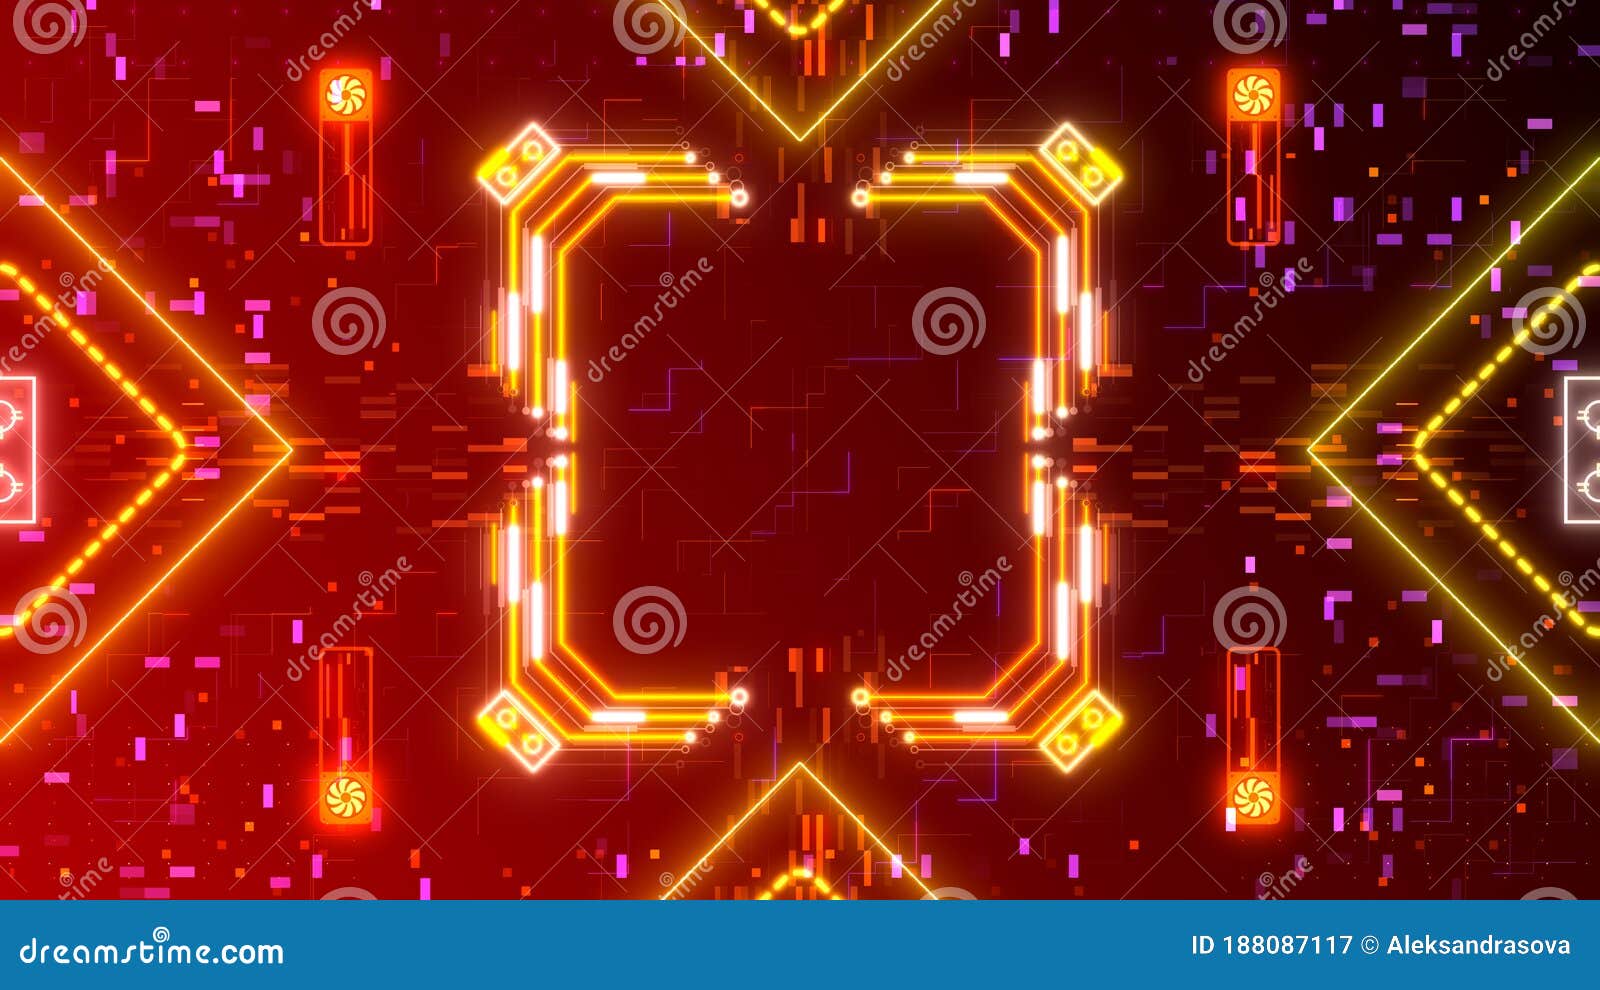 Red Neon Cyber Background. Digital Hud Illustration. Red, Yellow ...